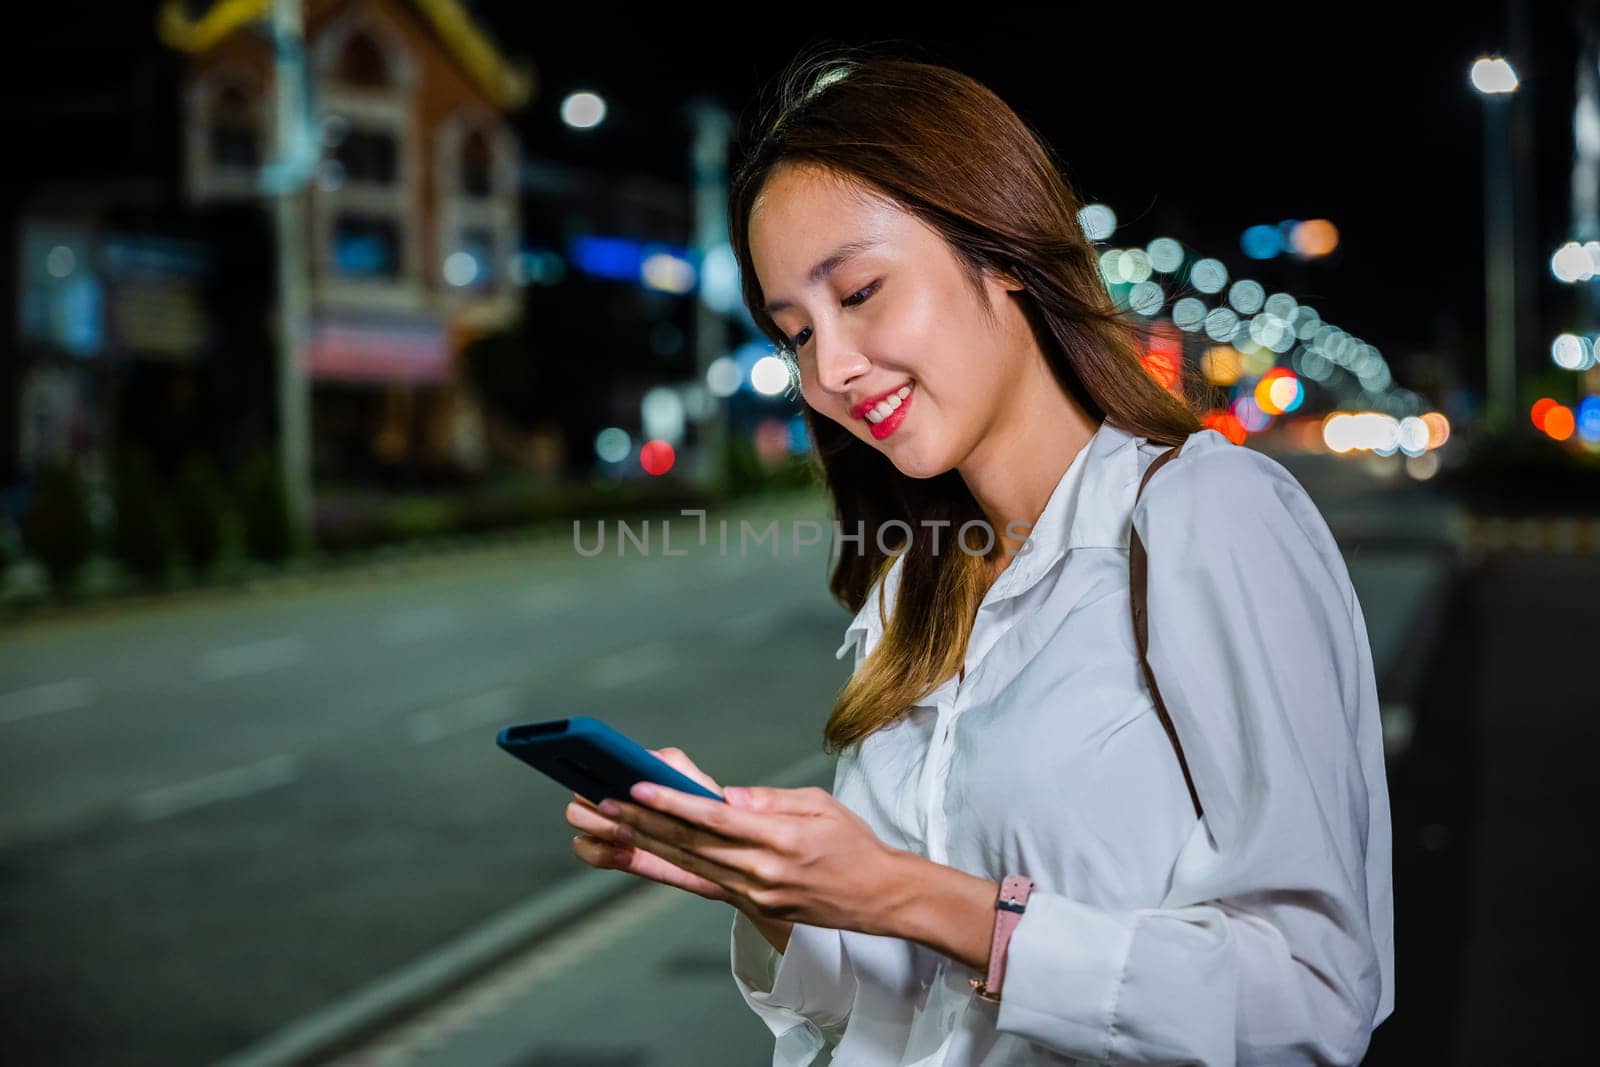 A woman stands on the sidewalk at night, holding her cellphone while waiting for transportation, with a vibrant orange and teal color scheme.